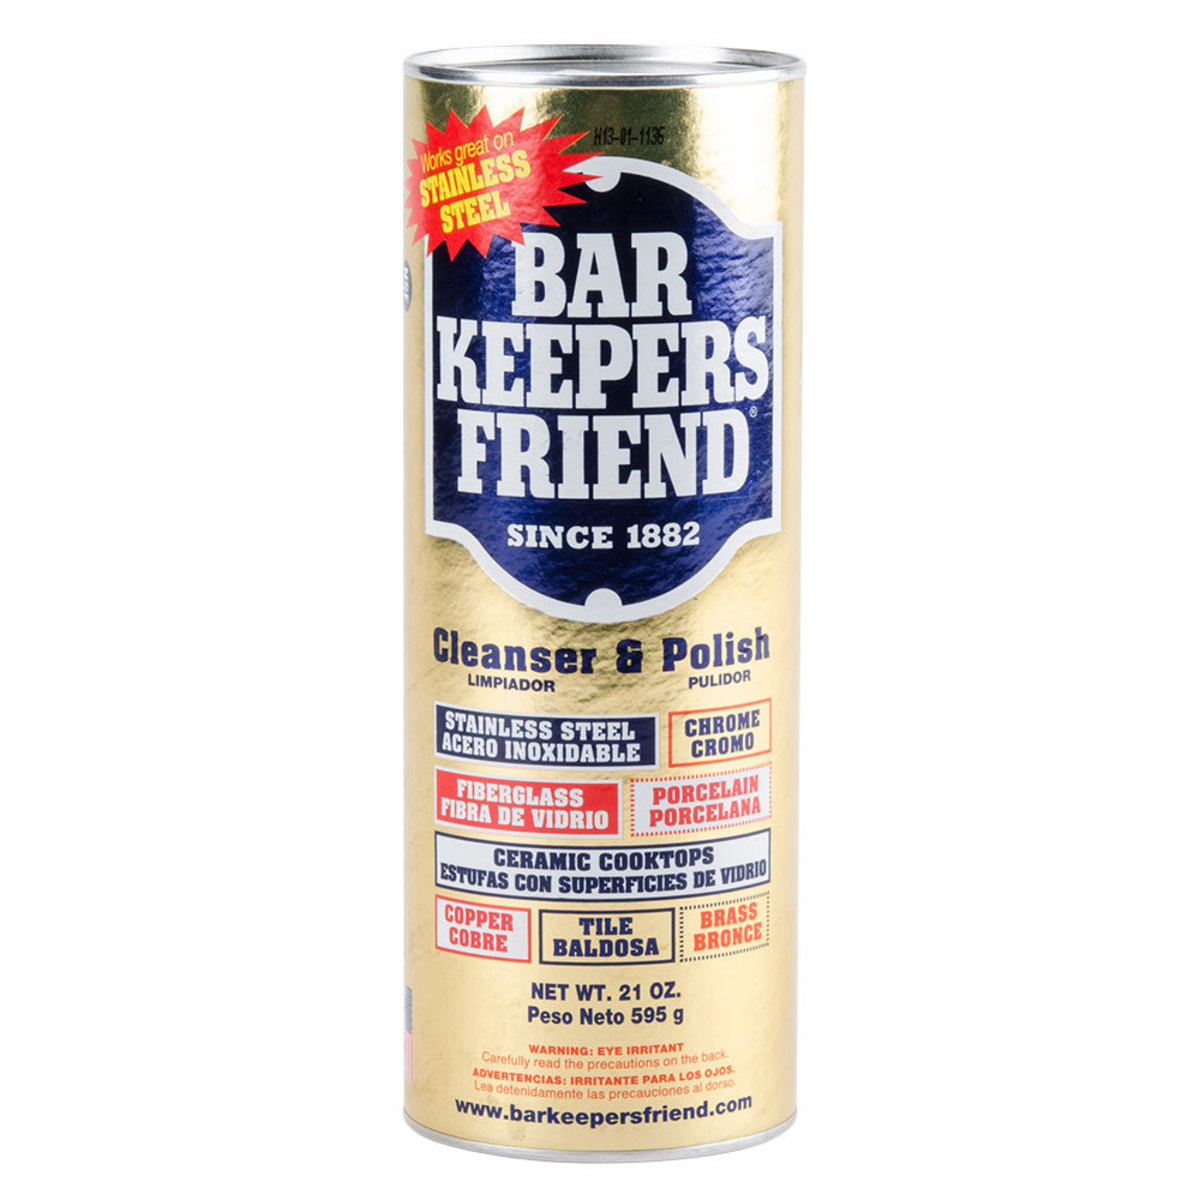 Bar Keepers Friend works wonders to remove sunscreen stains from fabric